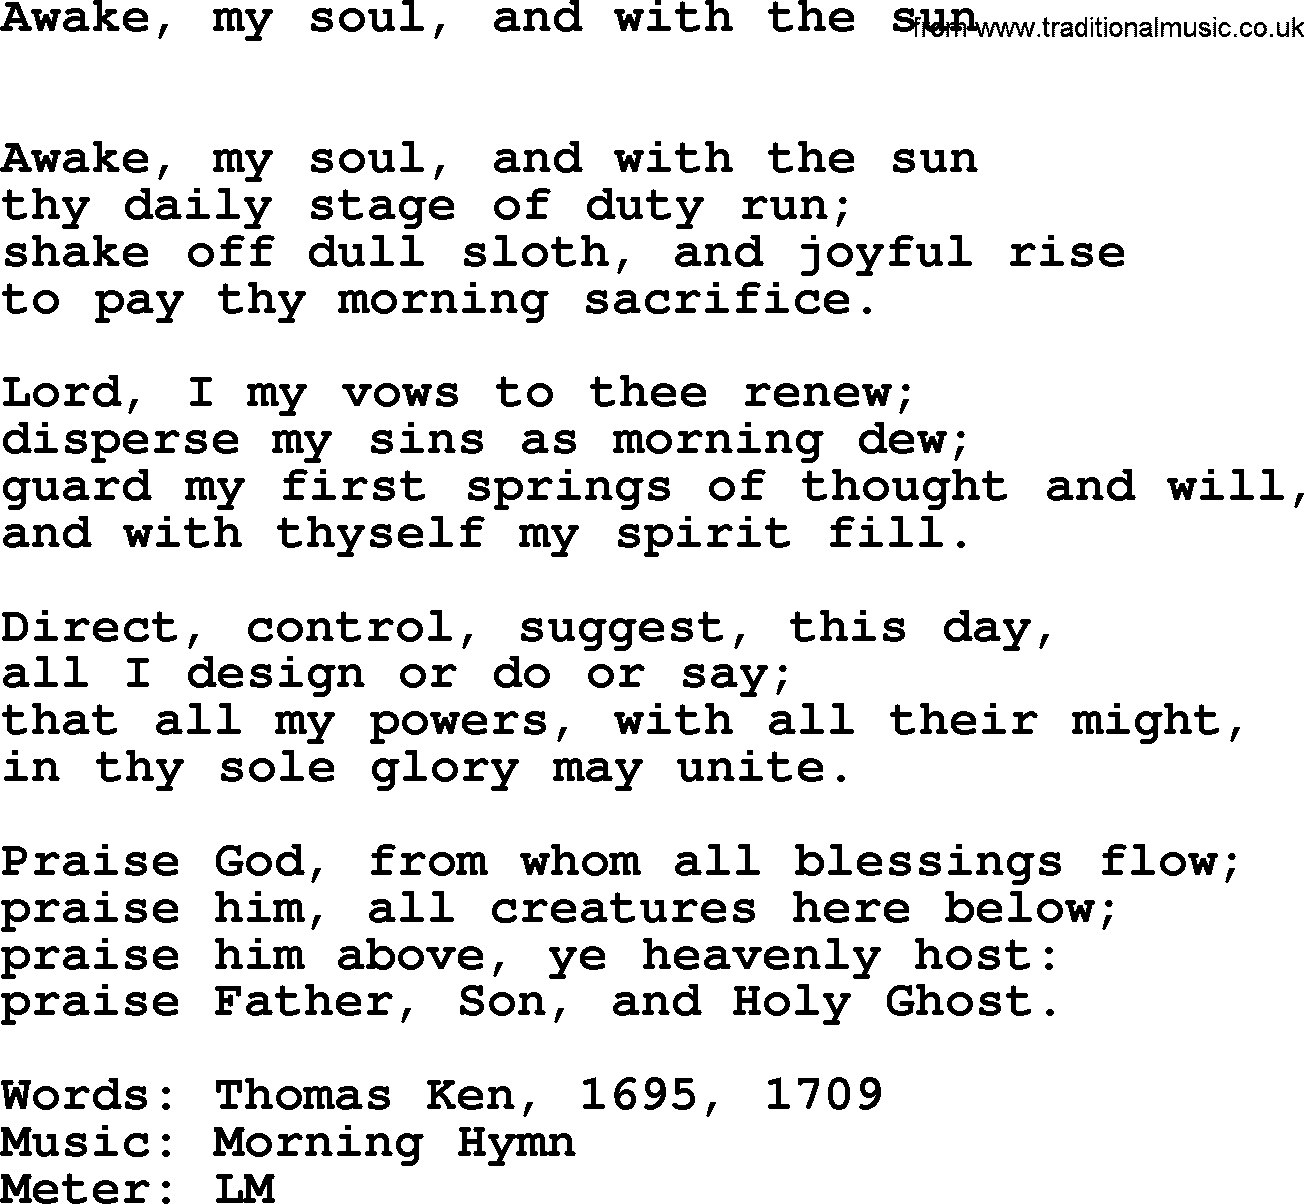 Book of Common Praise Hymn: Awake, My Soul, And With The Sun.txt lyrics with midi music